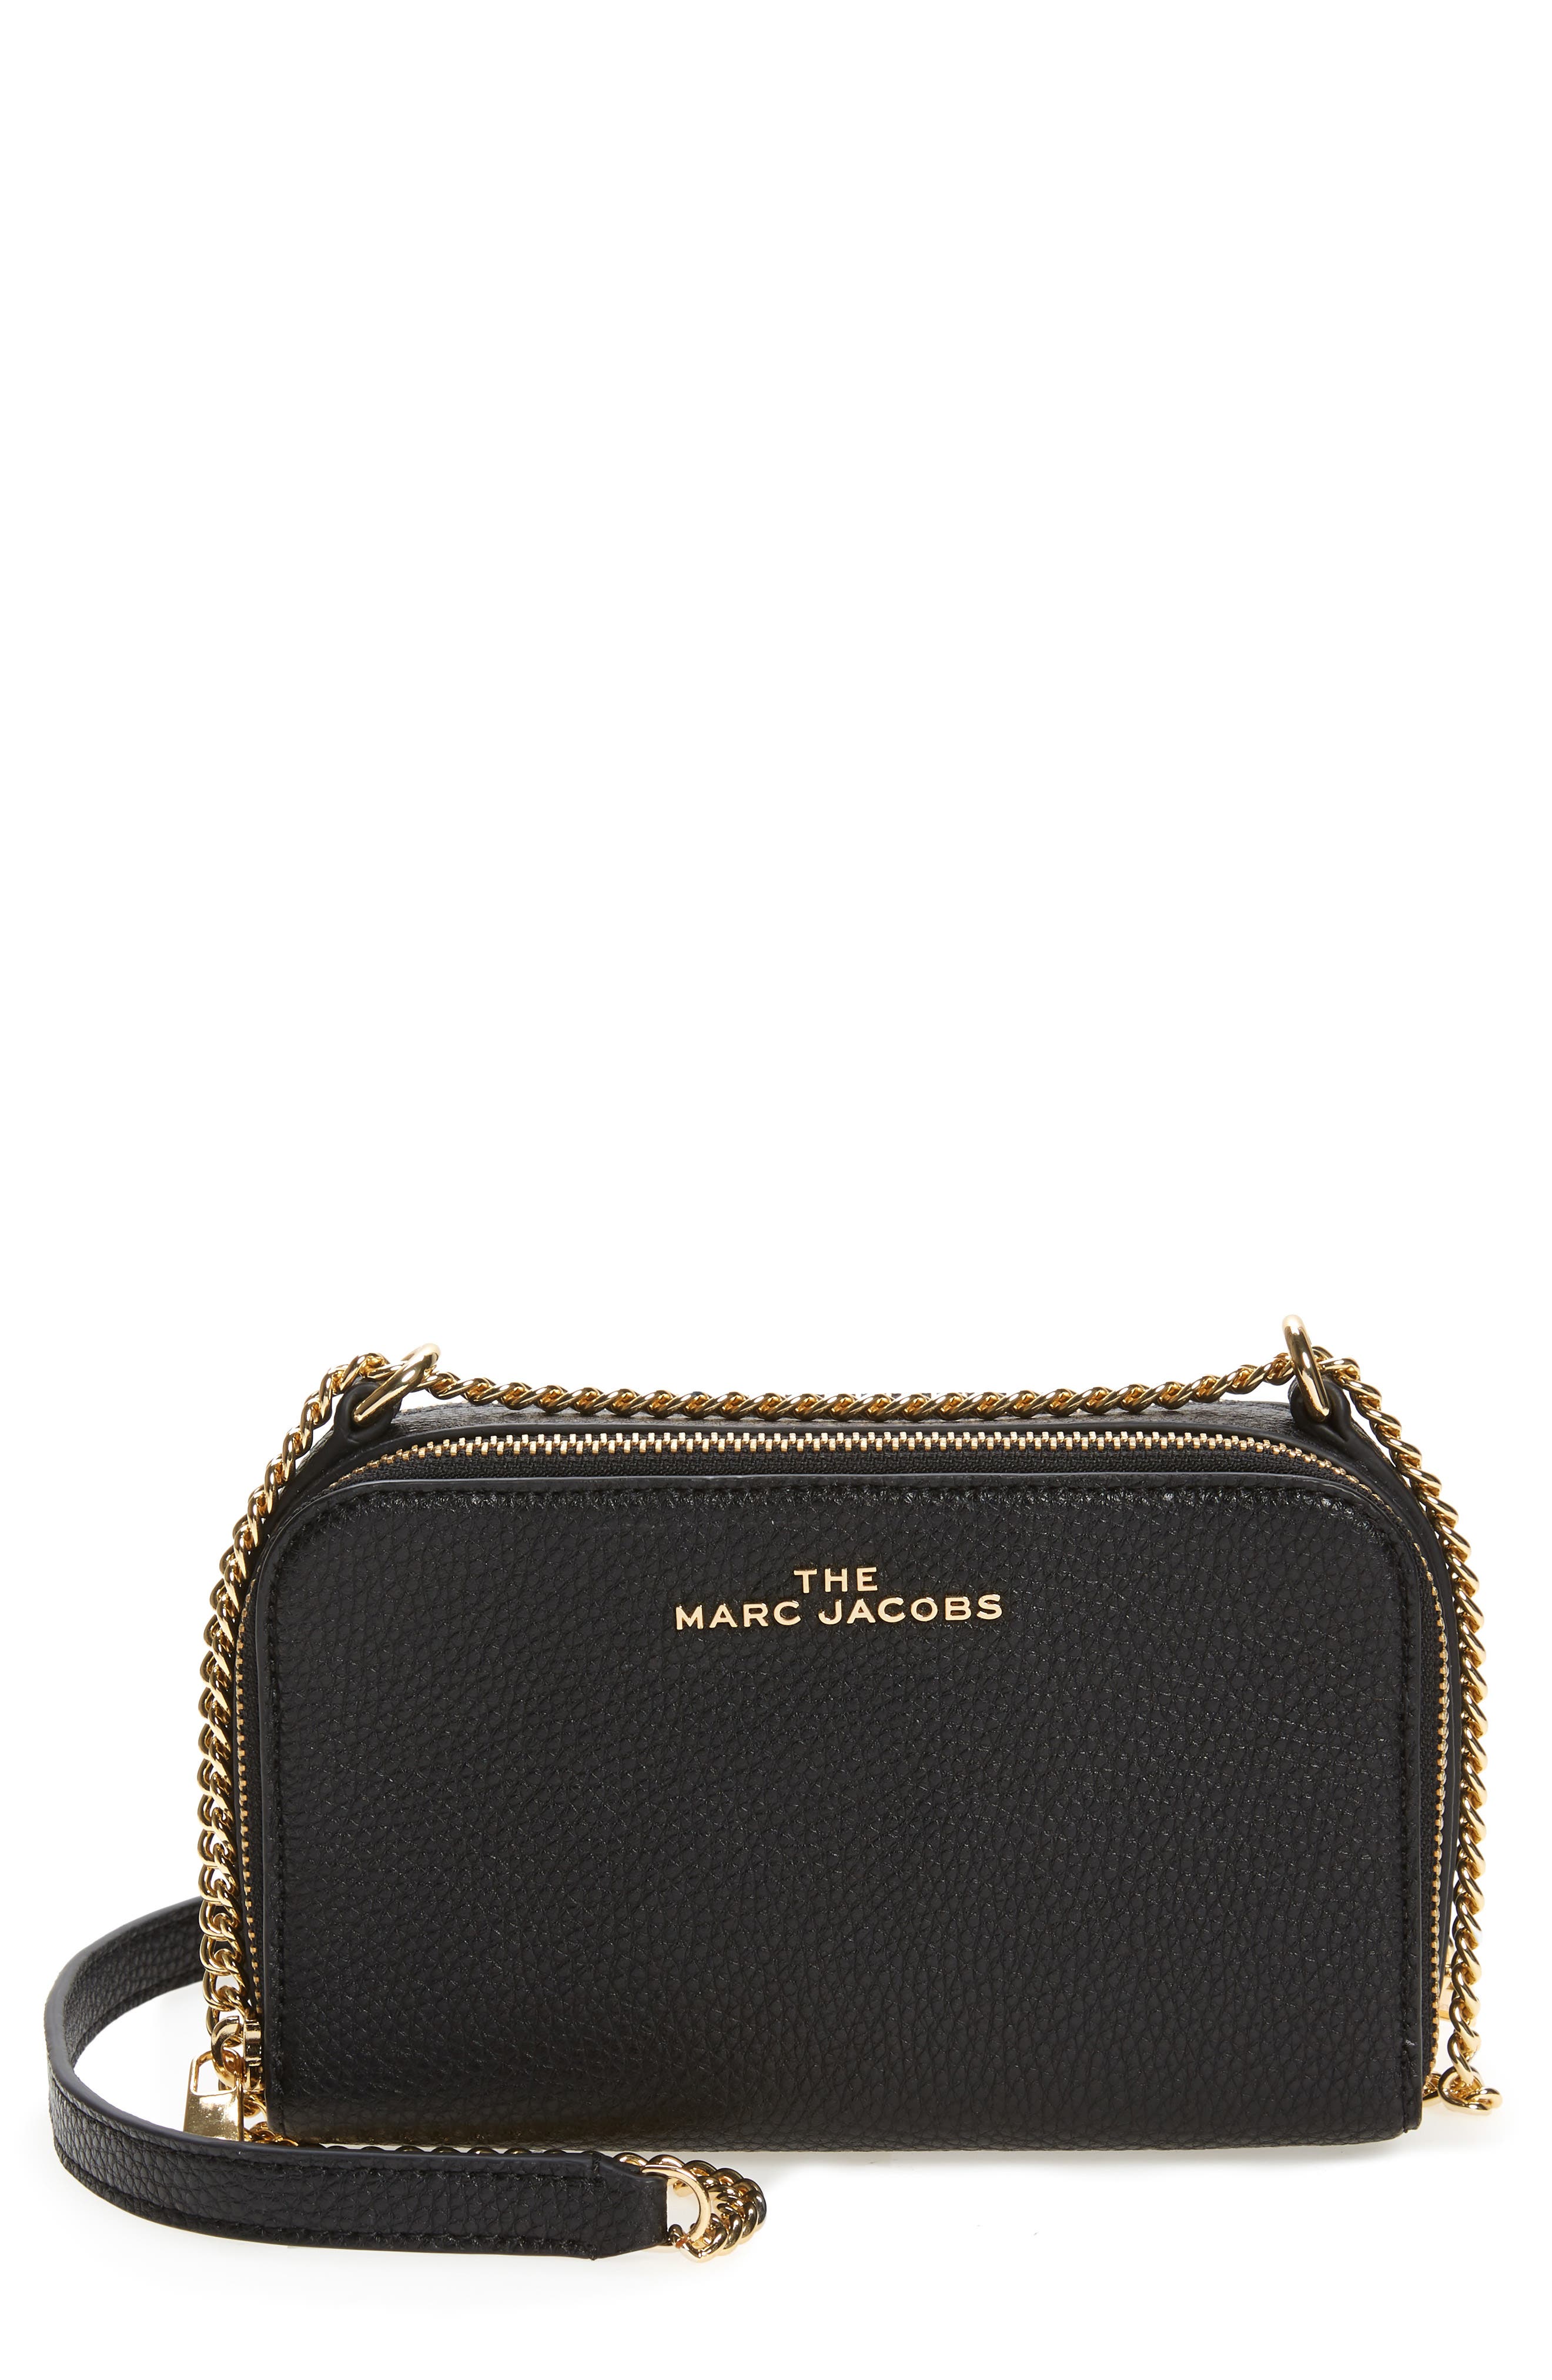 THE MARC JACOBS | The Everyday Crossbody | Nordstrom Rack